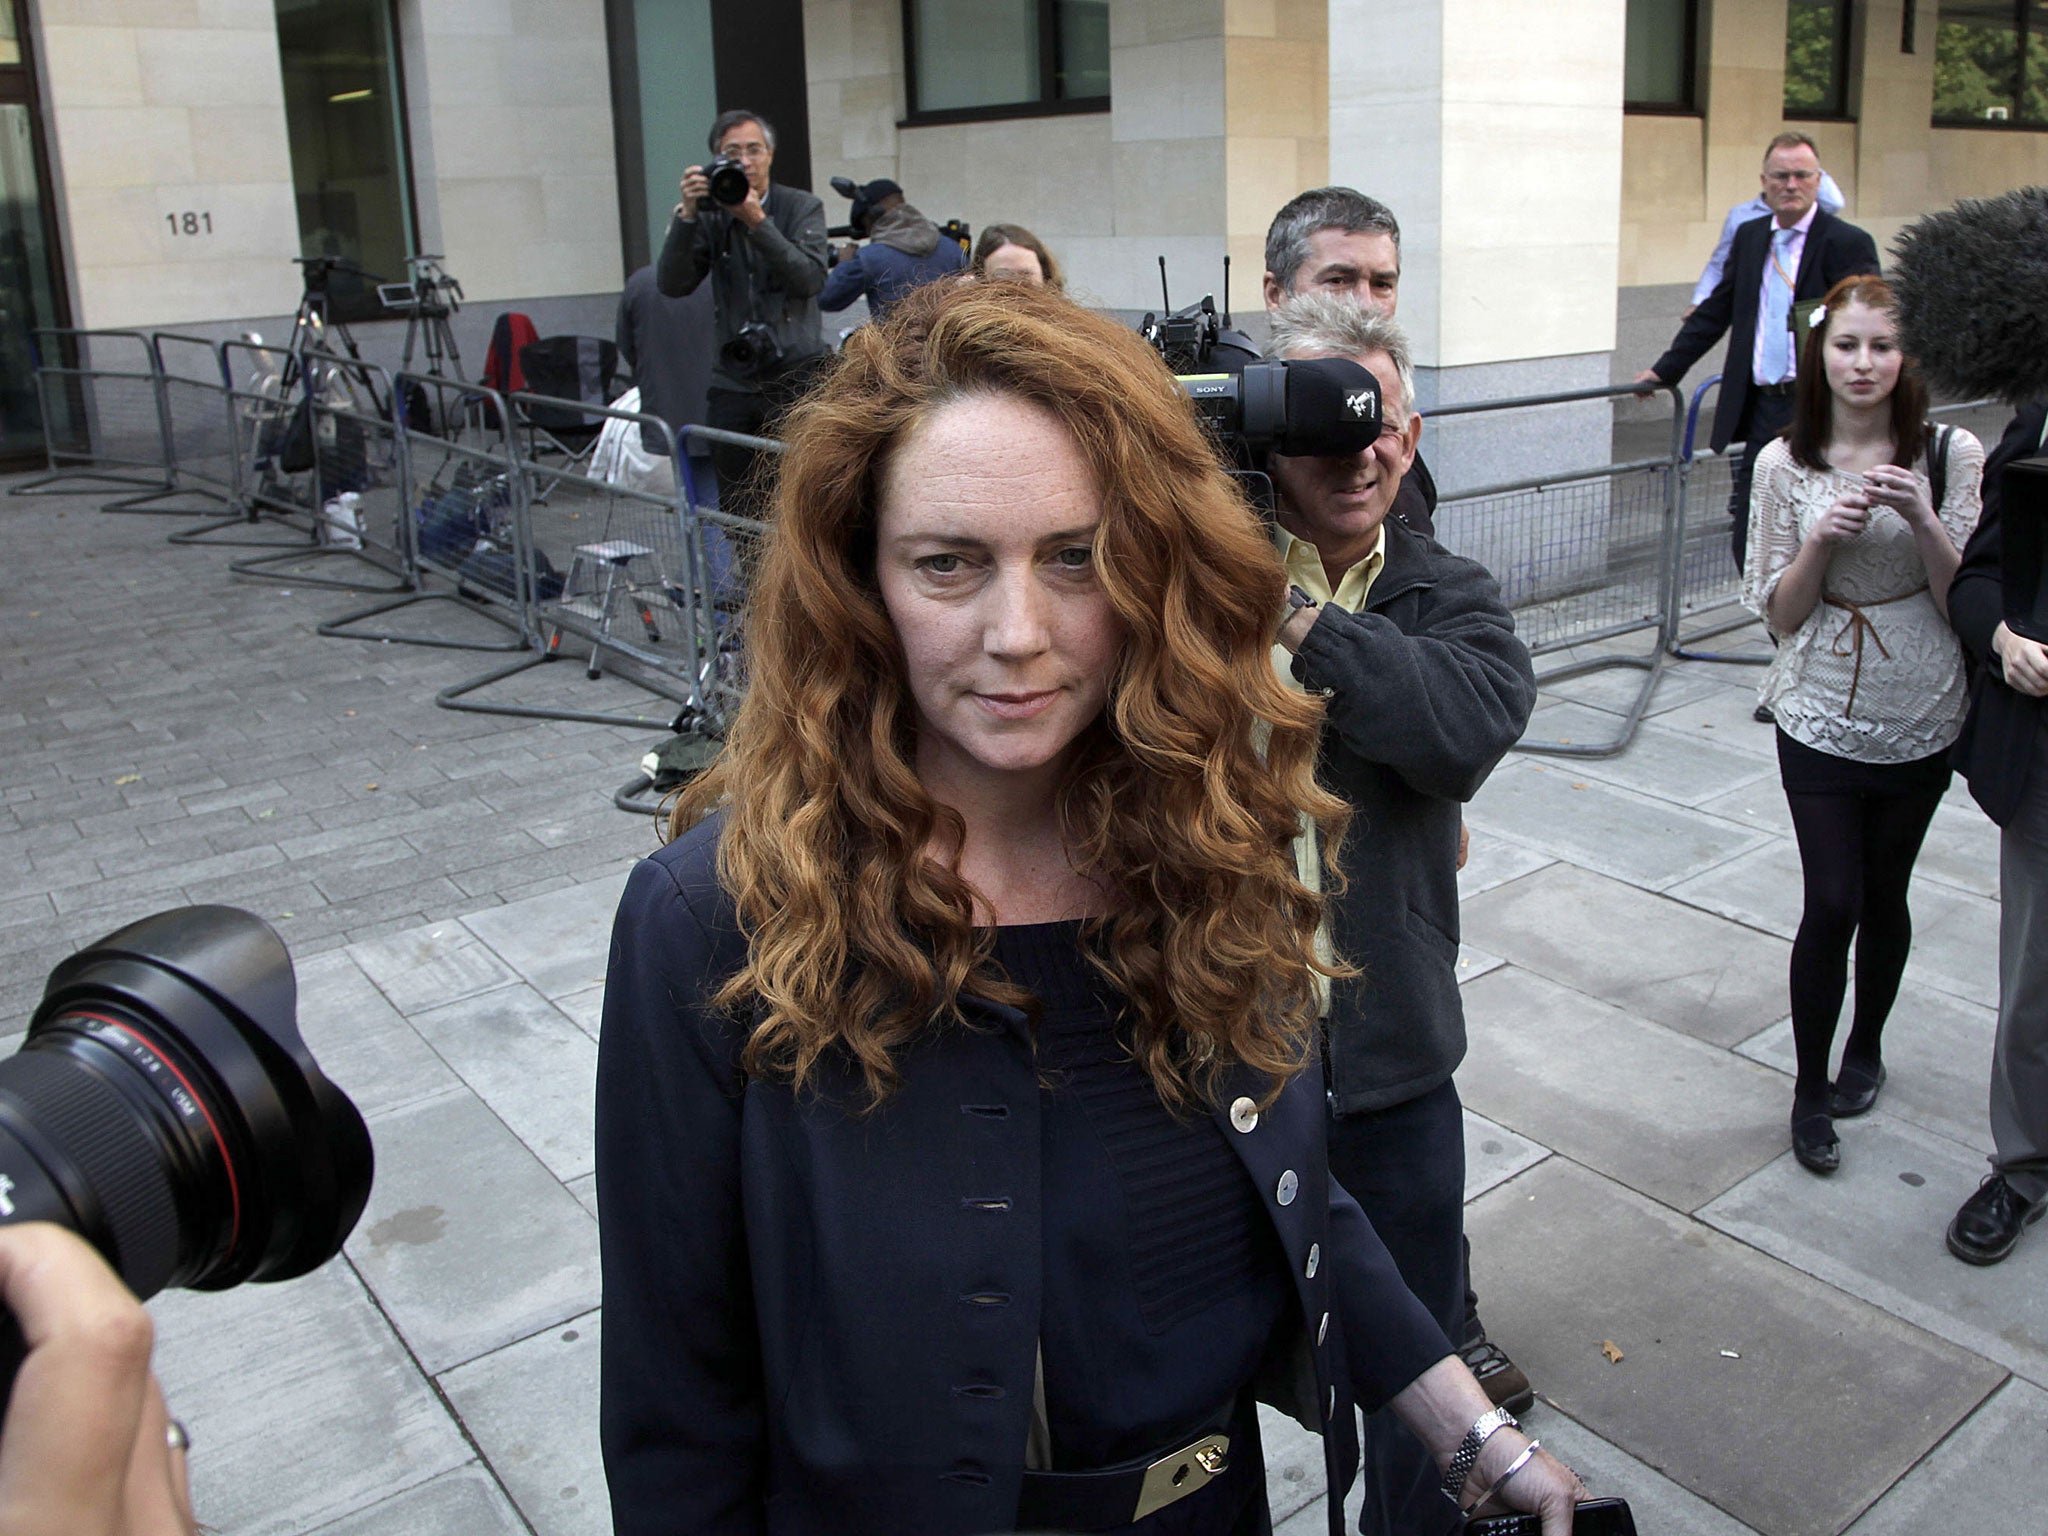 The former ‘News of the World’ editor Rebekah Brooks